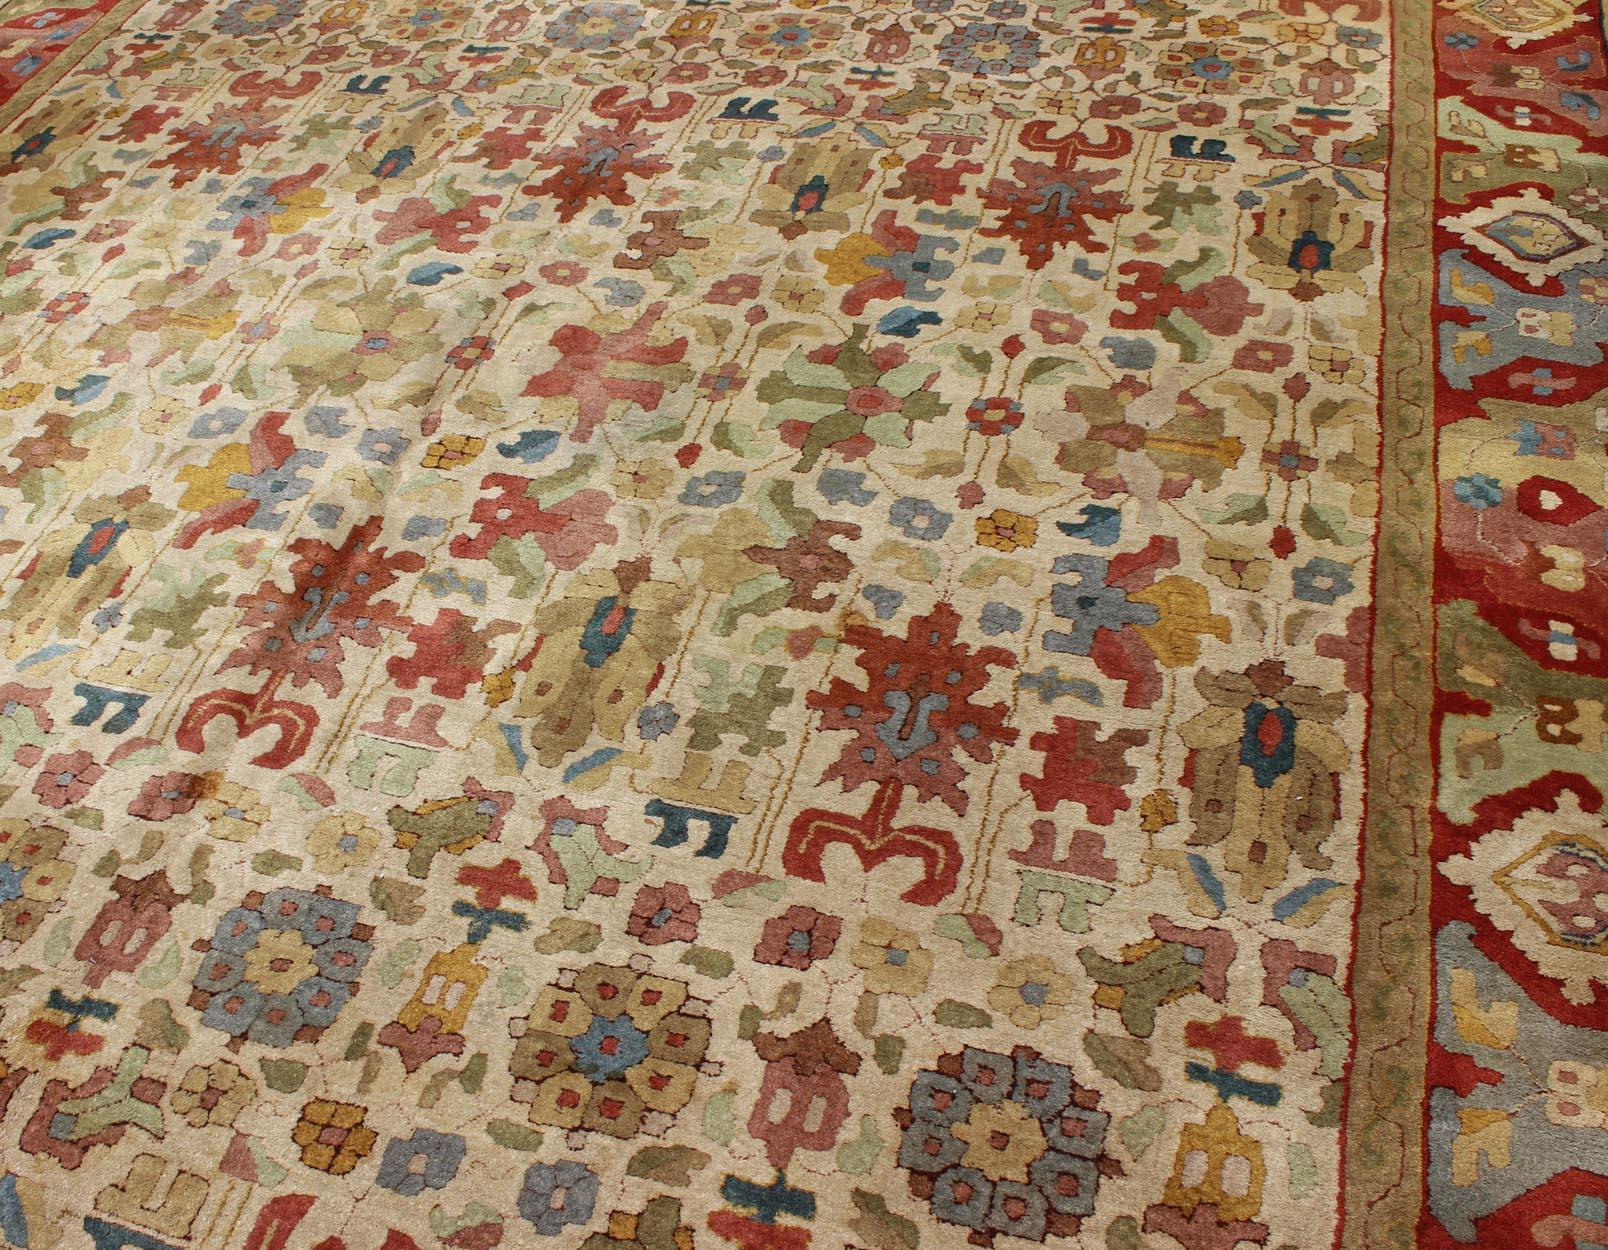 Wool Vintage German Rug with Sub-Geometric Palmettes, Blossoms and Leaves